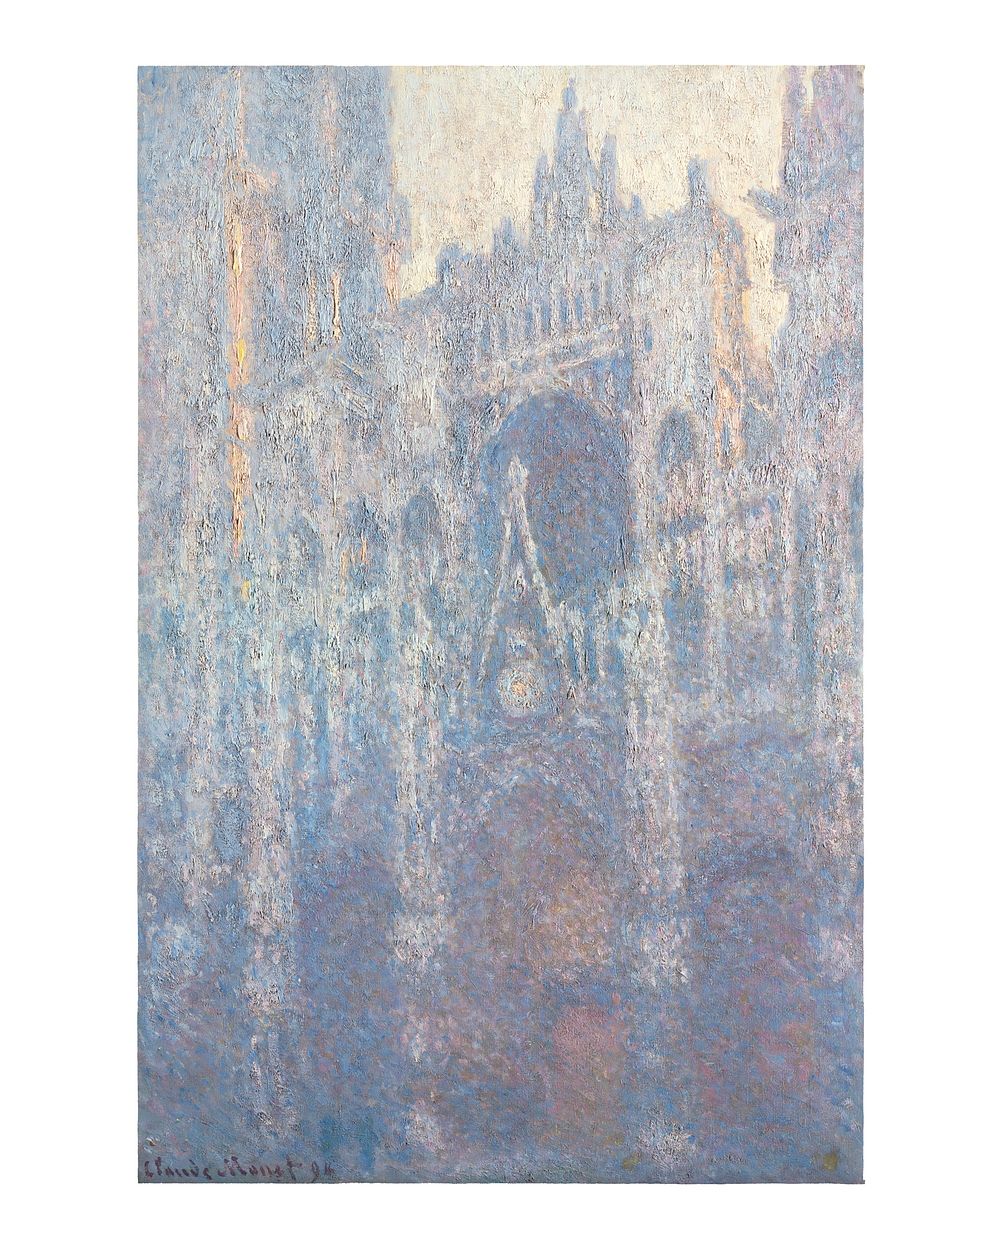 The Portal of Rouen Cathedral in Morning Light illustration wall art print and poster. Original by Claude Monet, digitally…